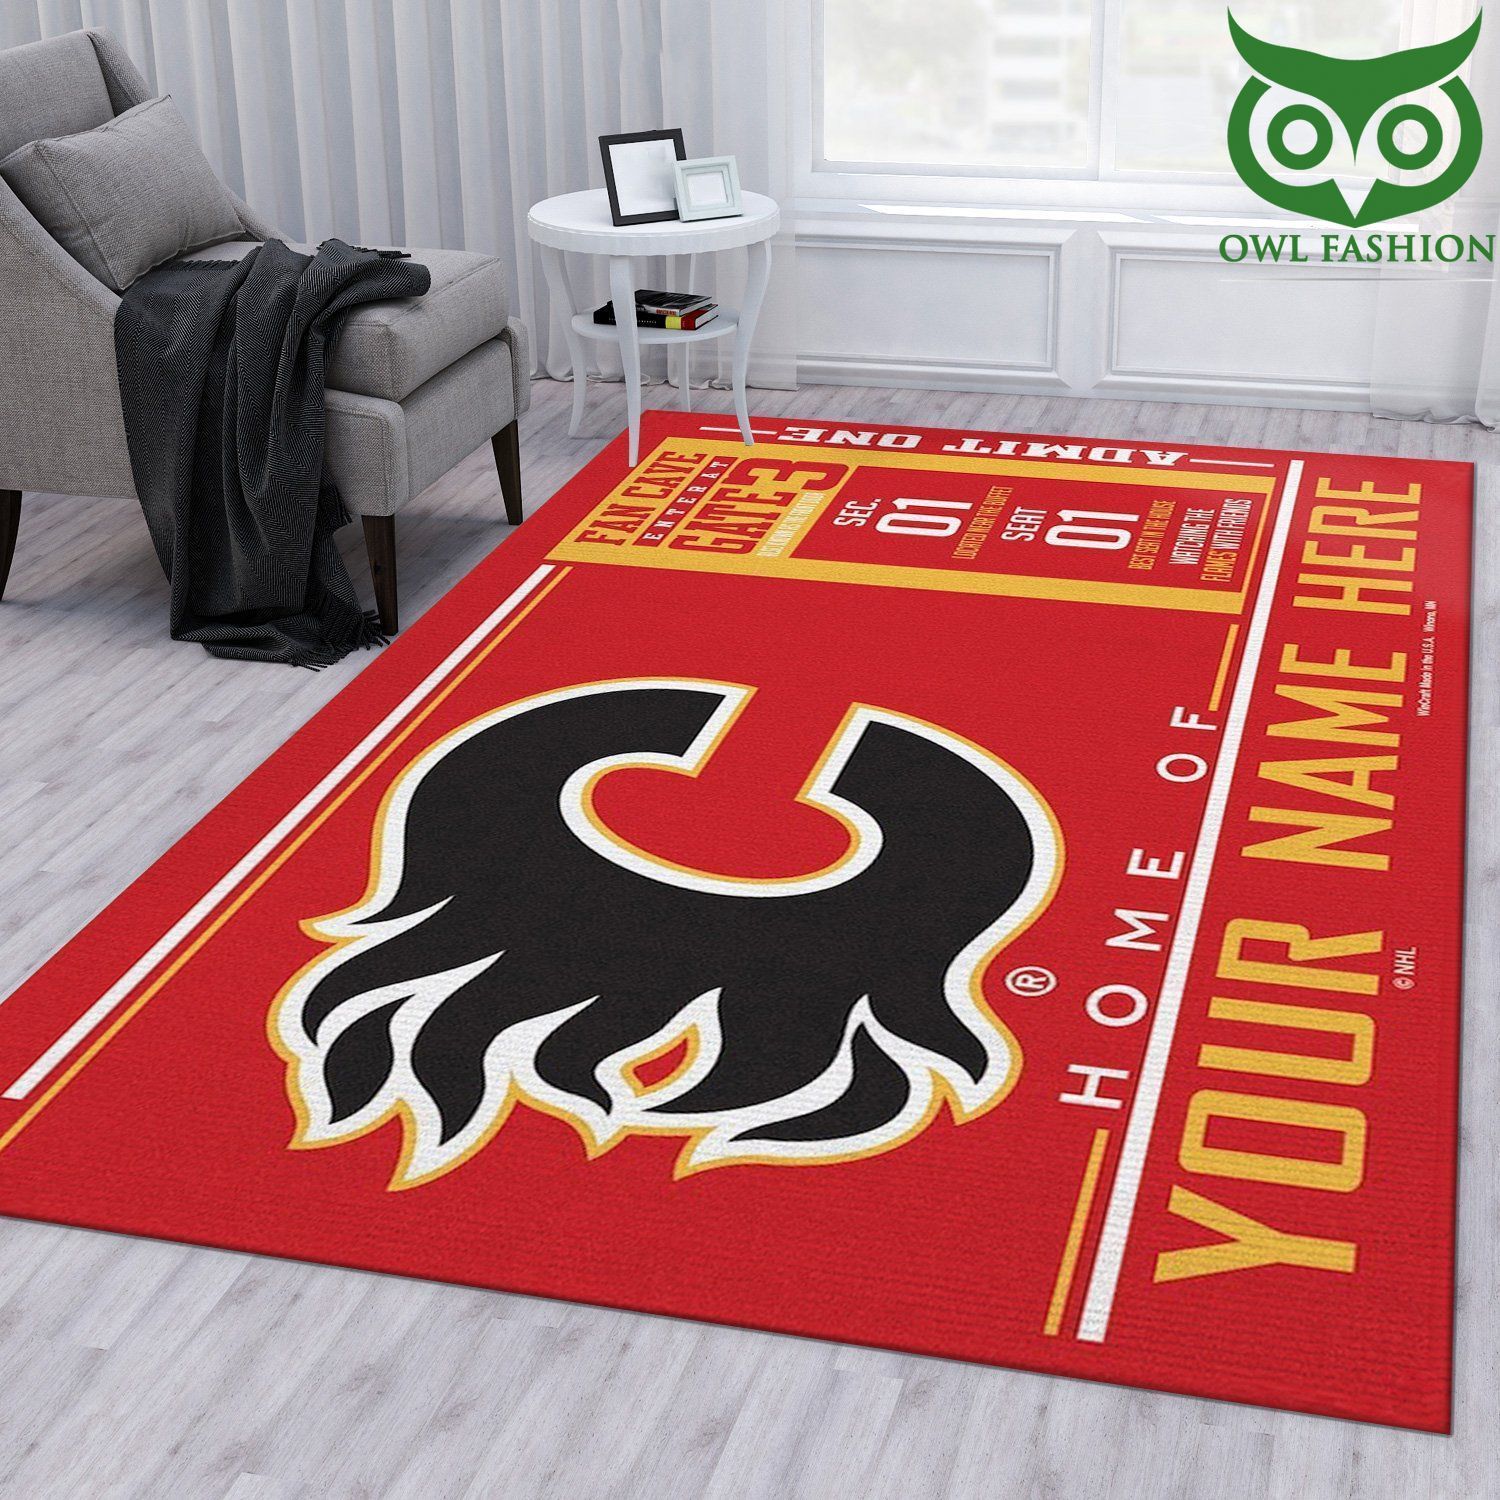 Customizable Calgary Flames Wincraft Personalized NHL carpet rug special edition